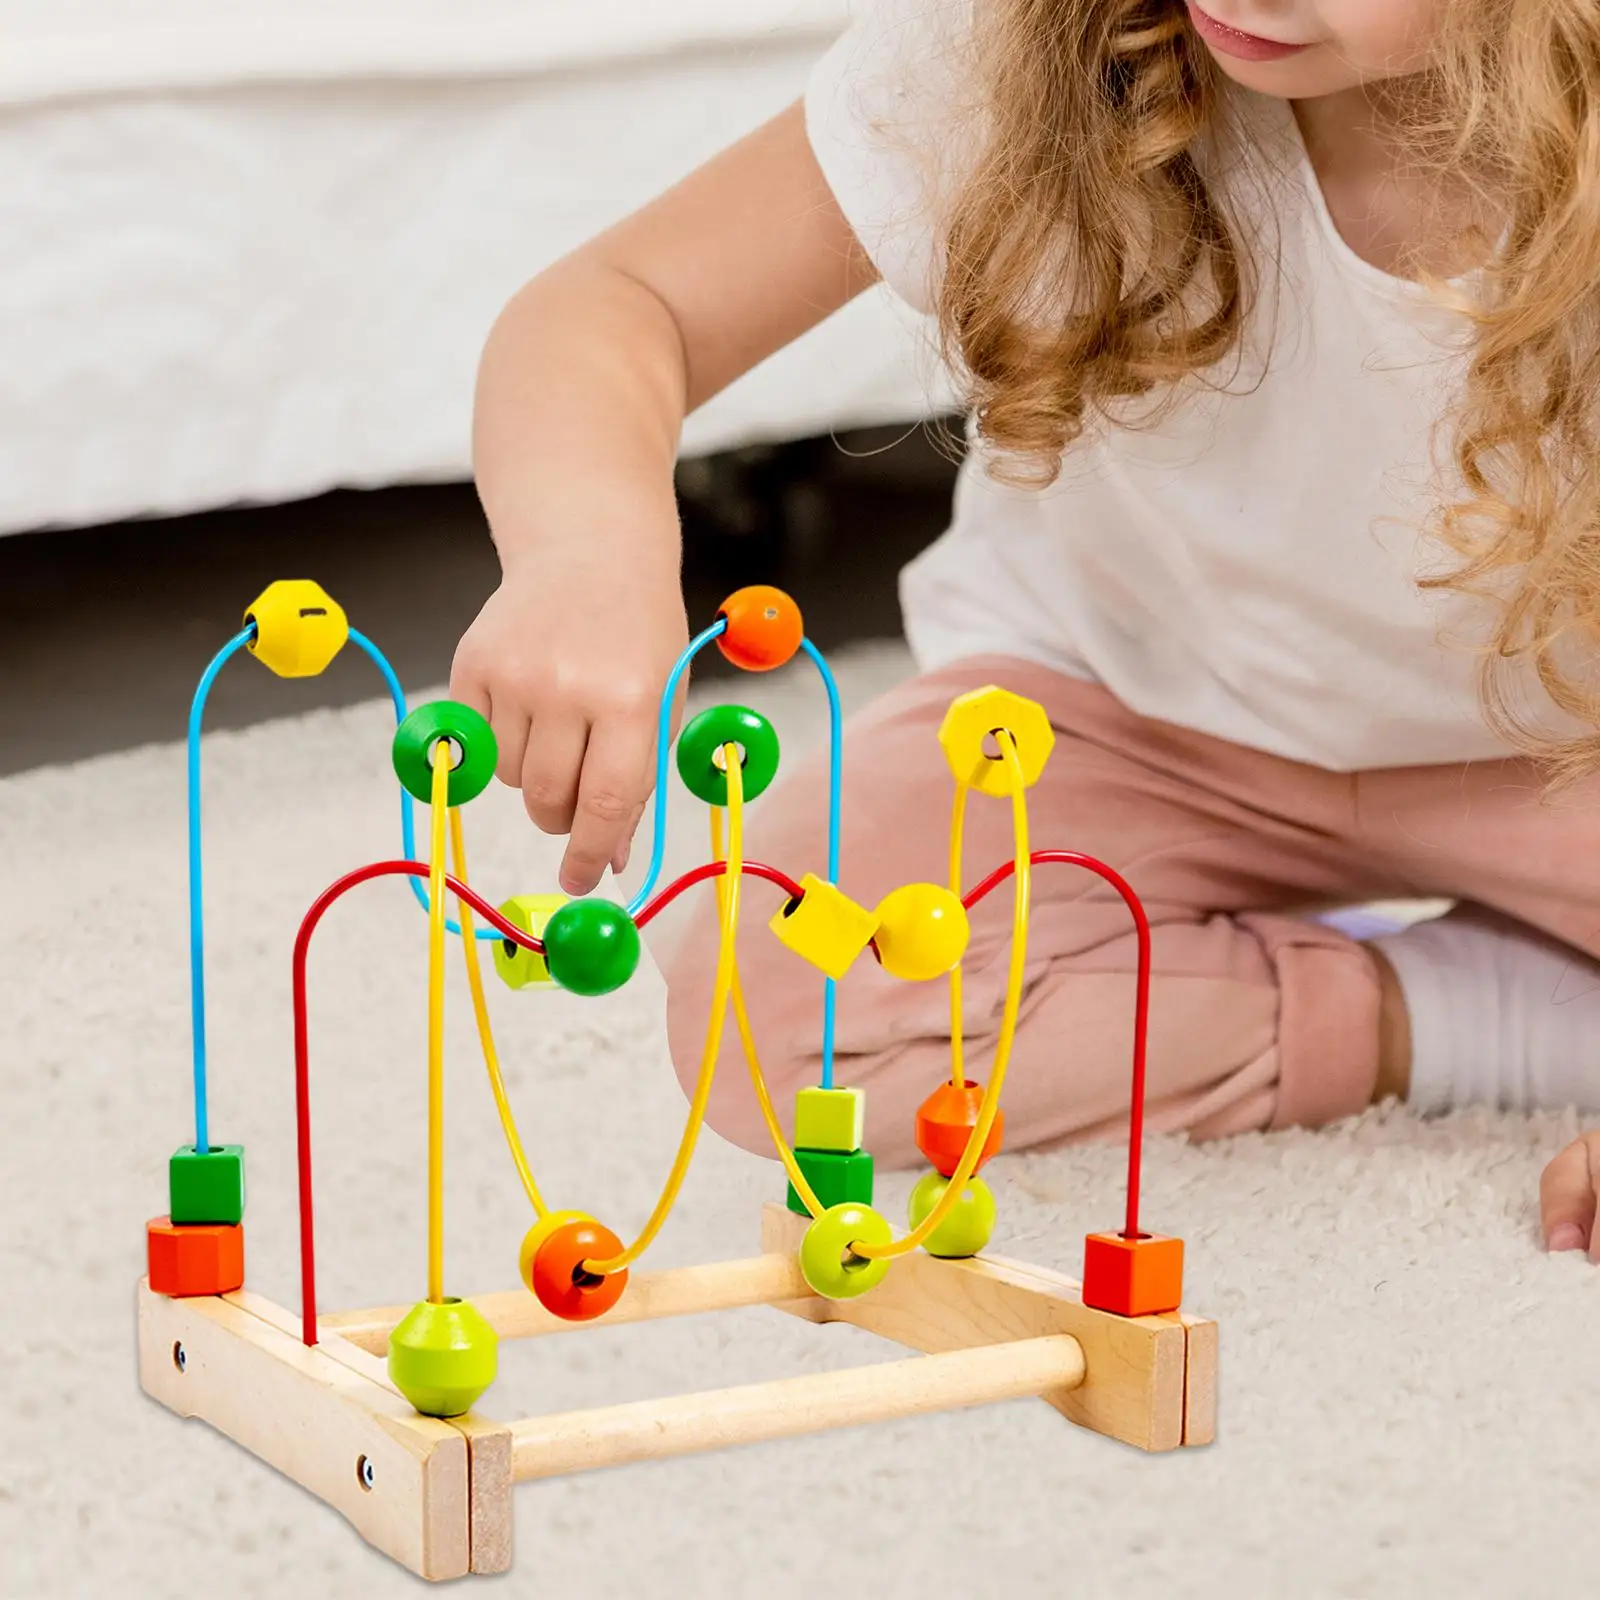 Colorful Roller Coaster, Bead Maze Toy, Wooden Motor Skills Development Toy, Colorful Roller Coaster, for Baby